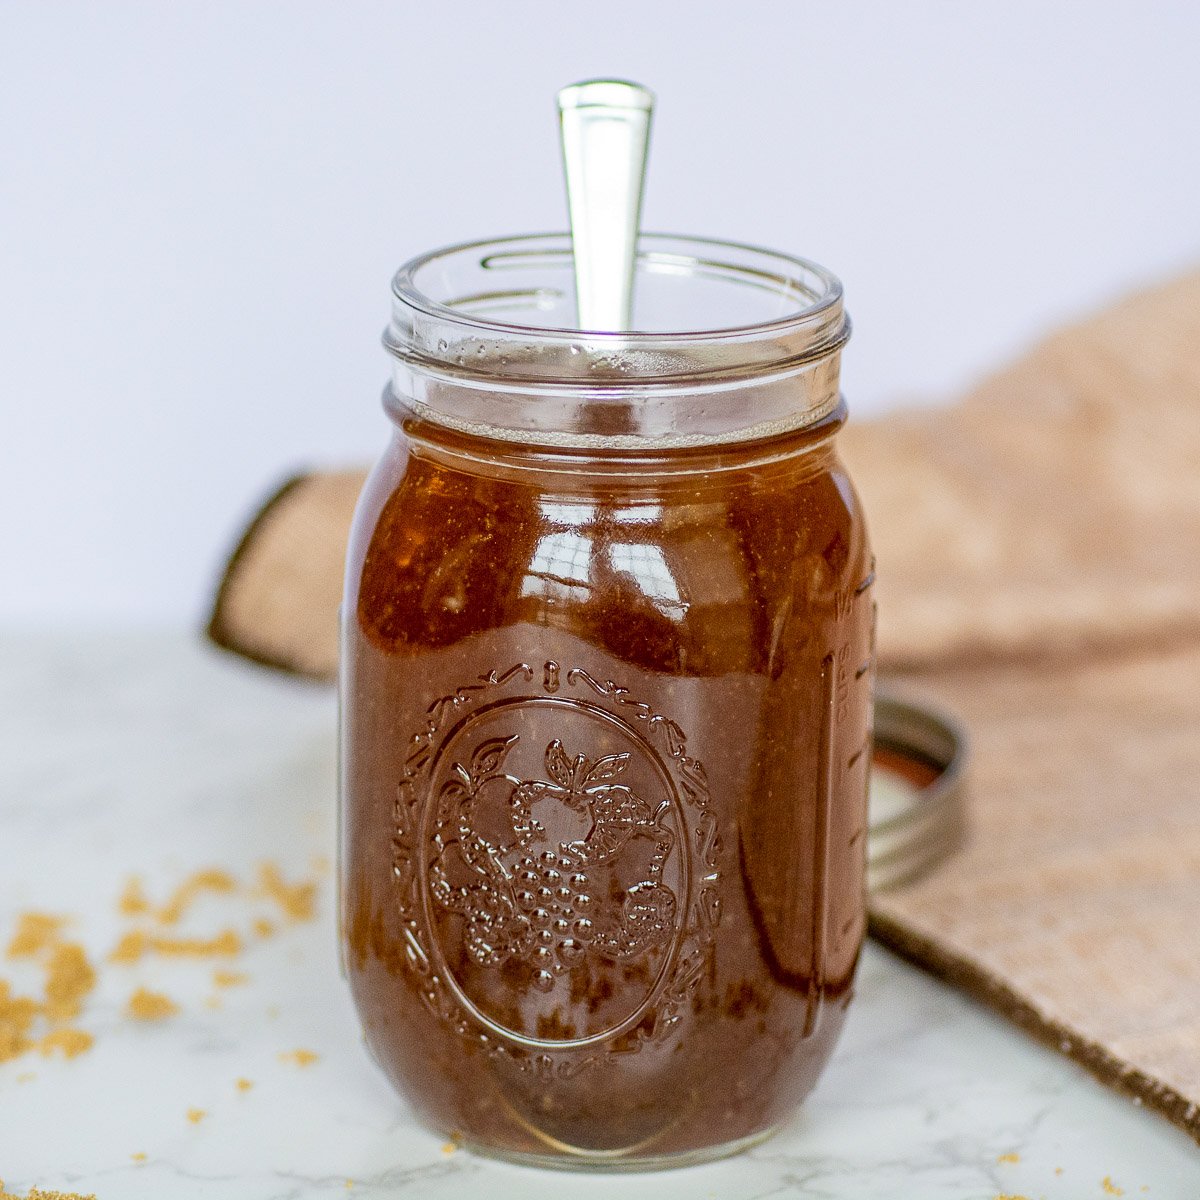 keto maple syrup in a jar